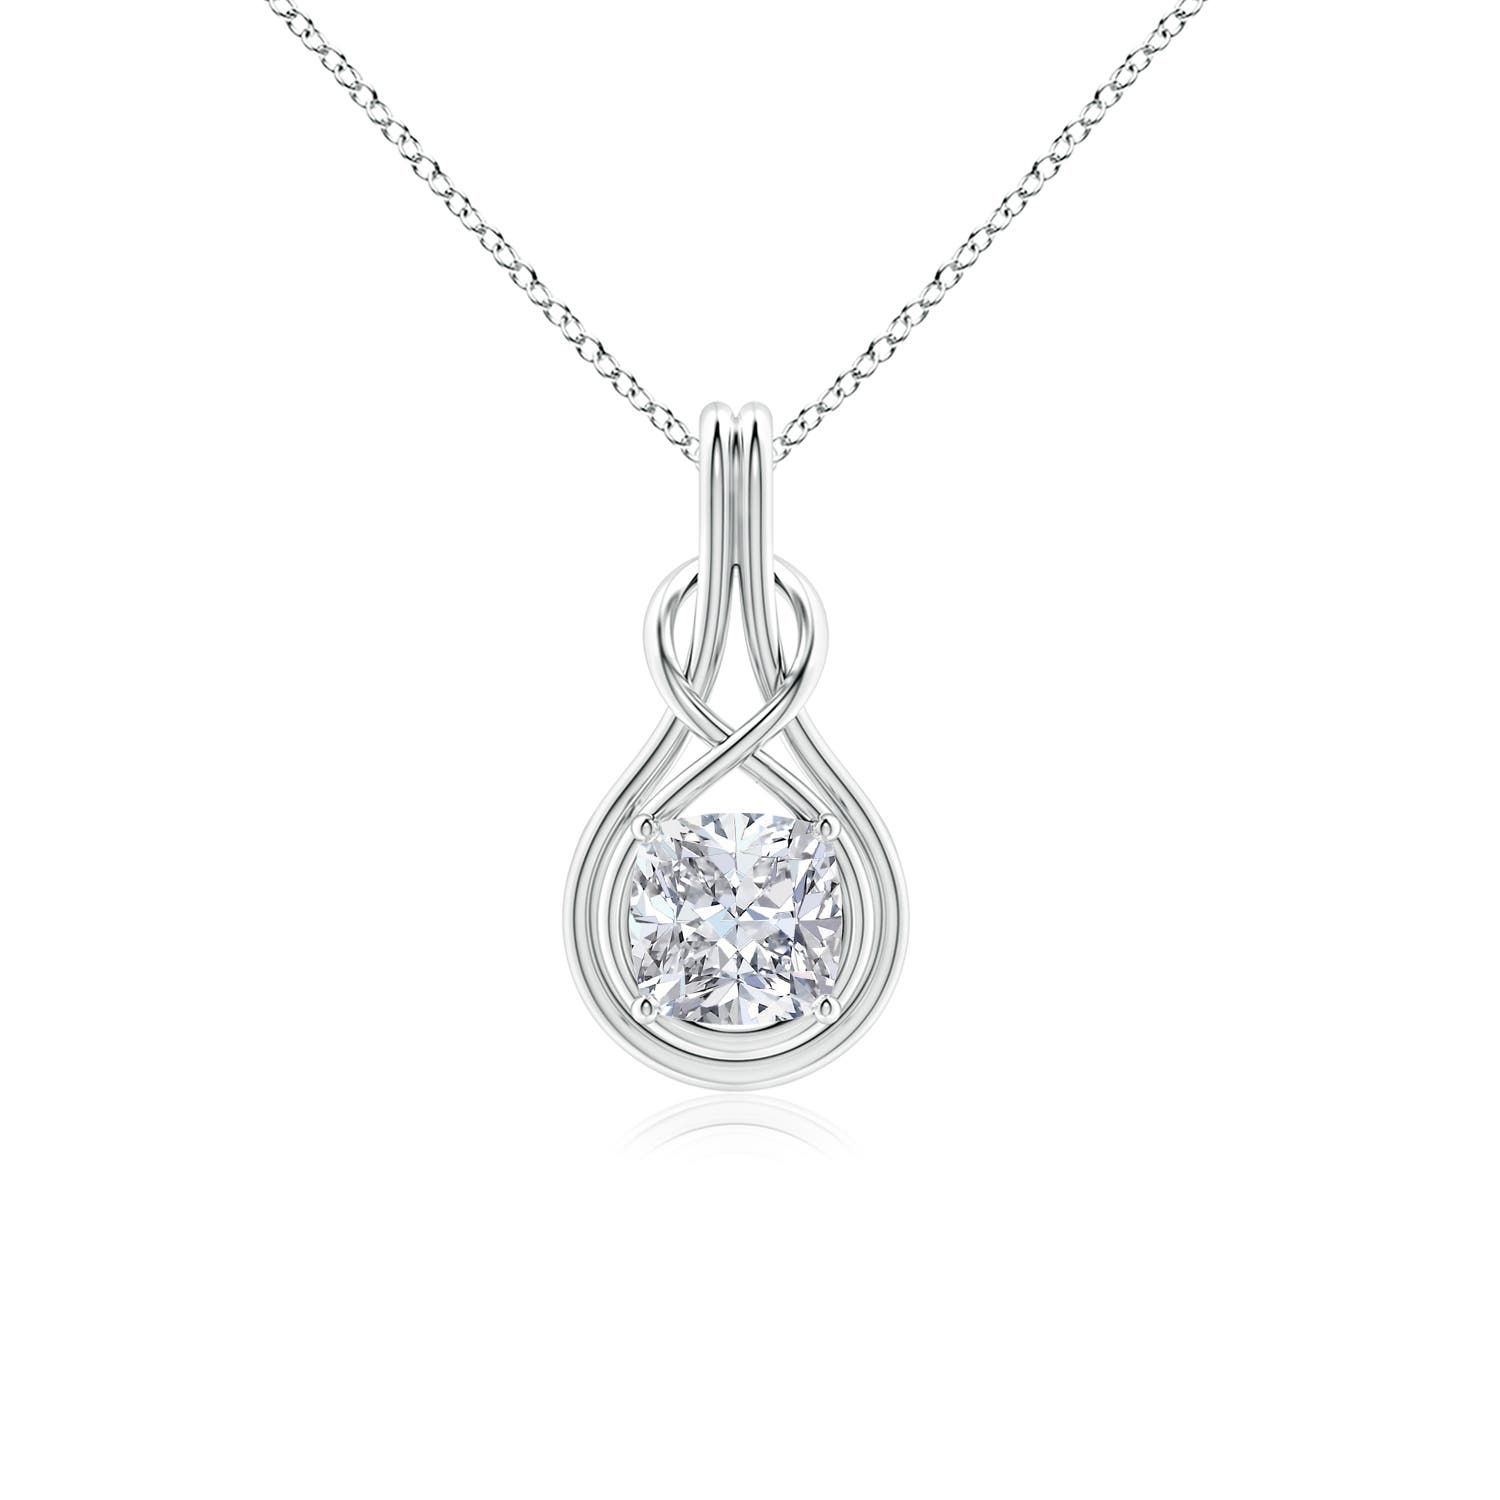 H, SI2 / 1.91 CT / 18 KT White Gold